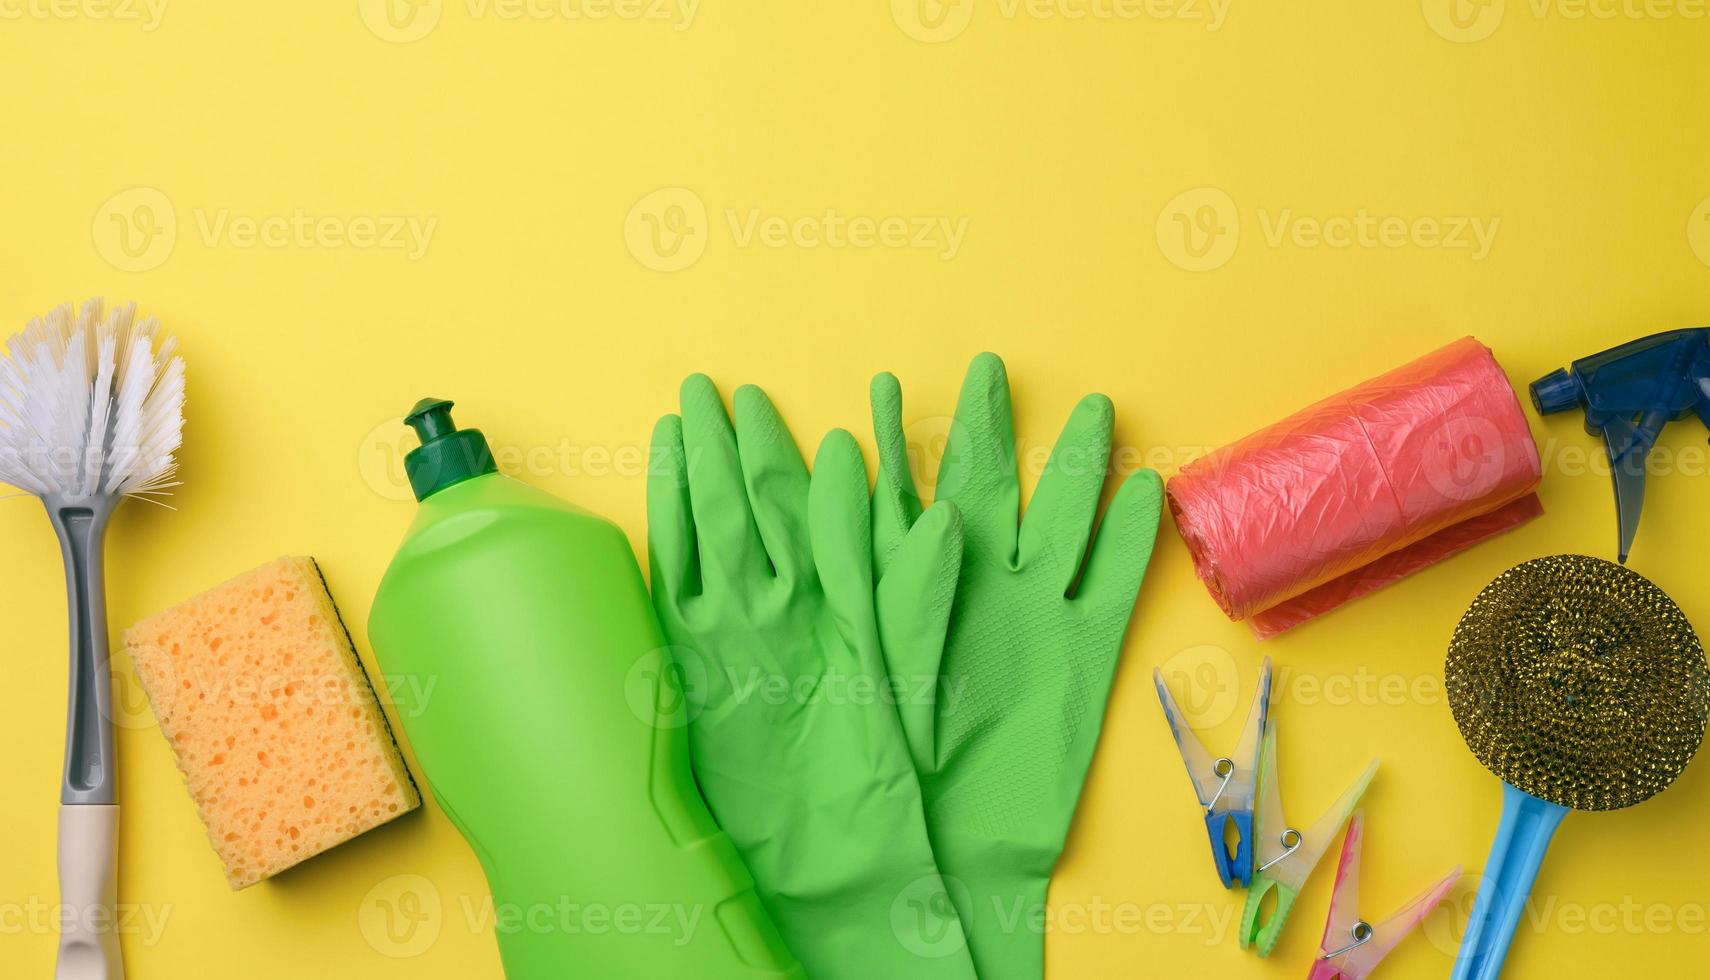 rubber green gloves for cleaning, red trash can plastic bag roll and plastic bottle with detergent, brush on yellow background photo